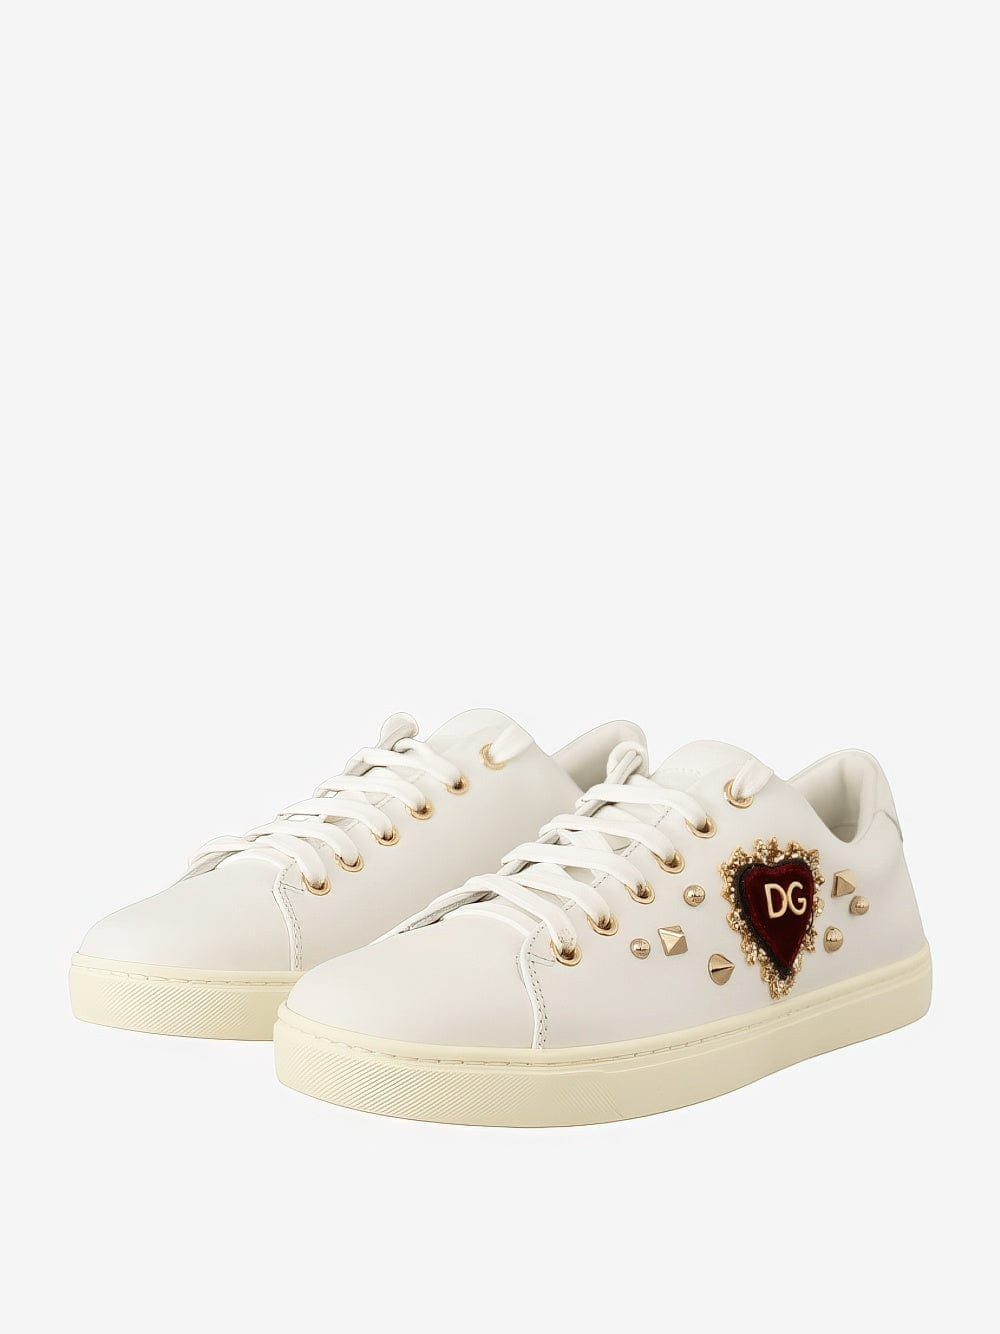 Dolce & Gabbana Sacred Heart Embroidered Embellished Sneakers